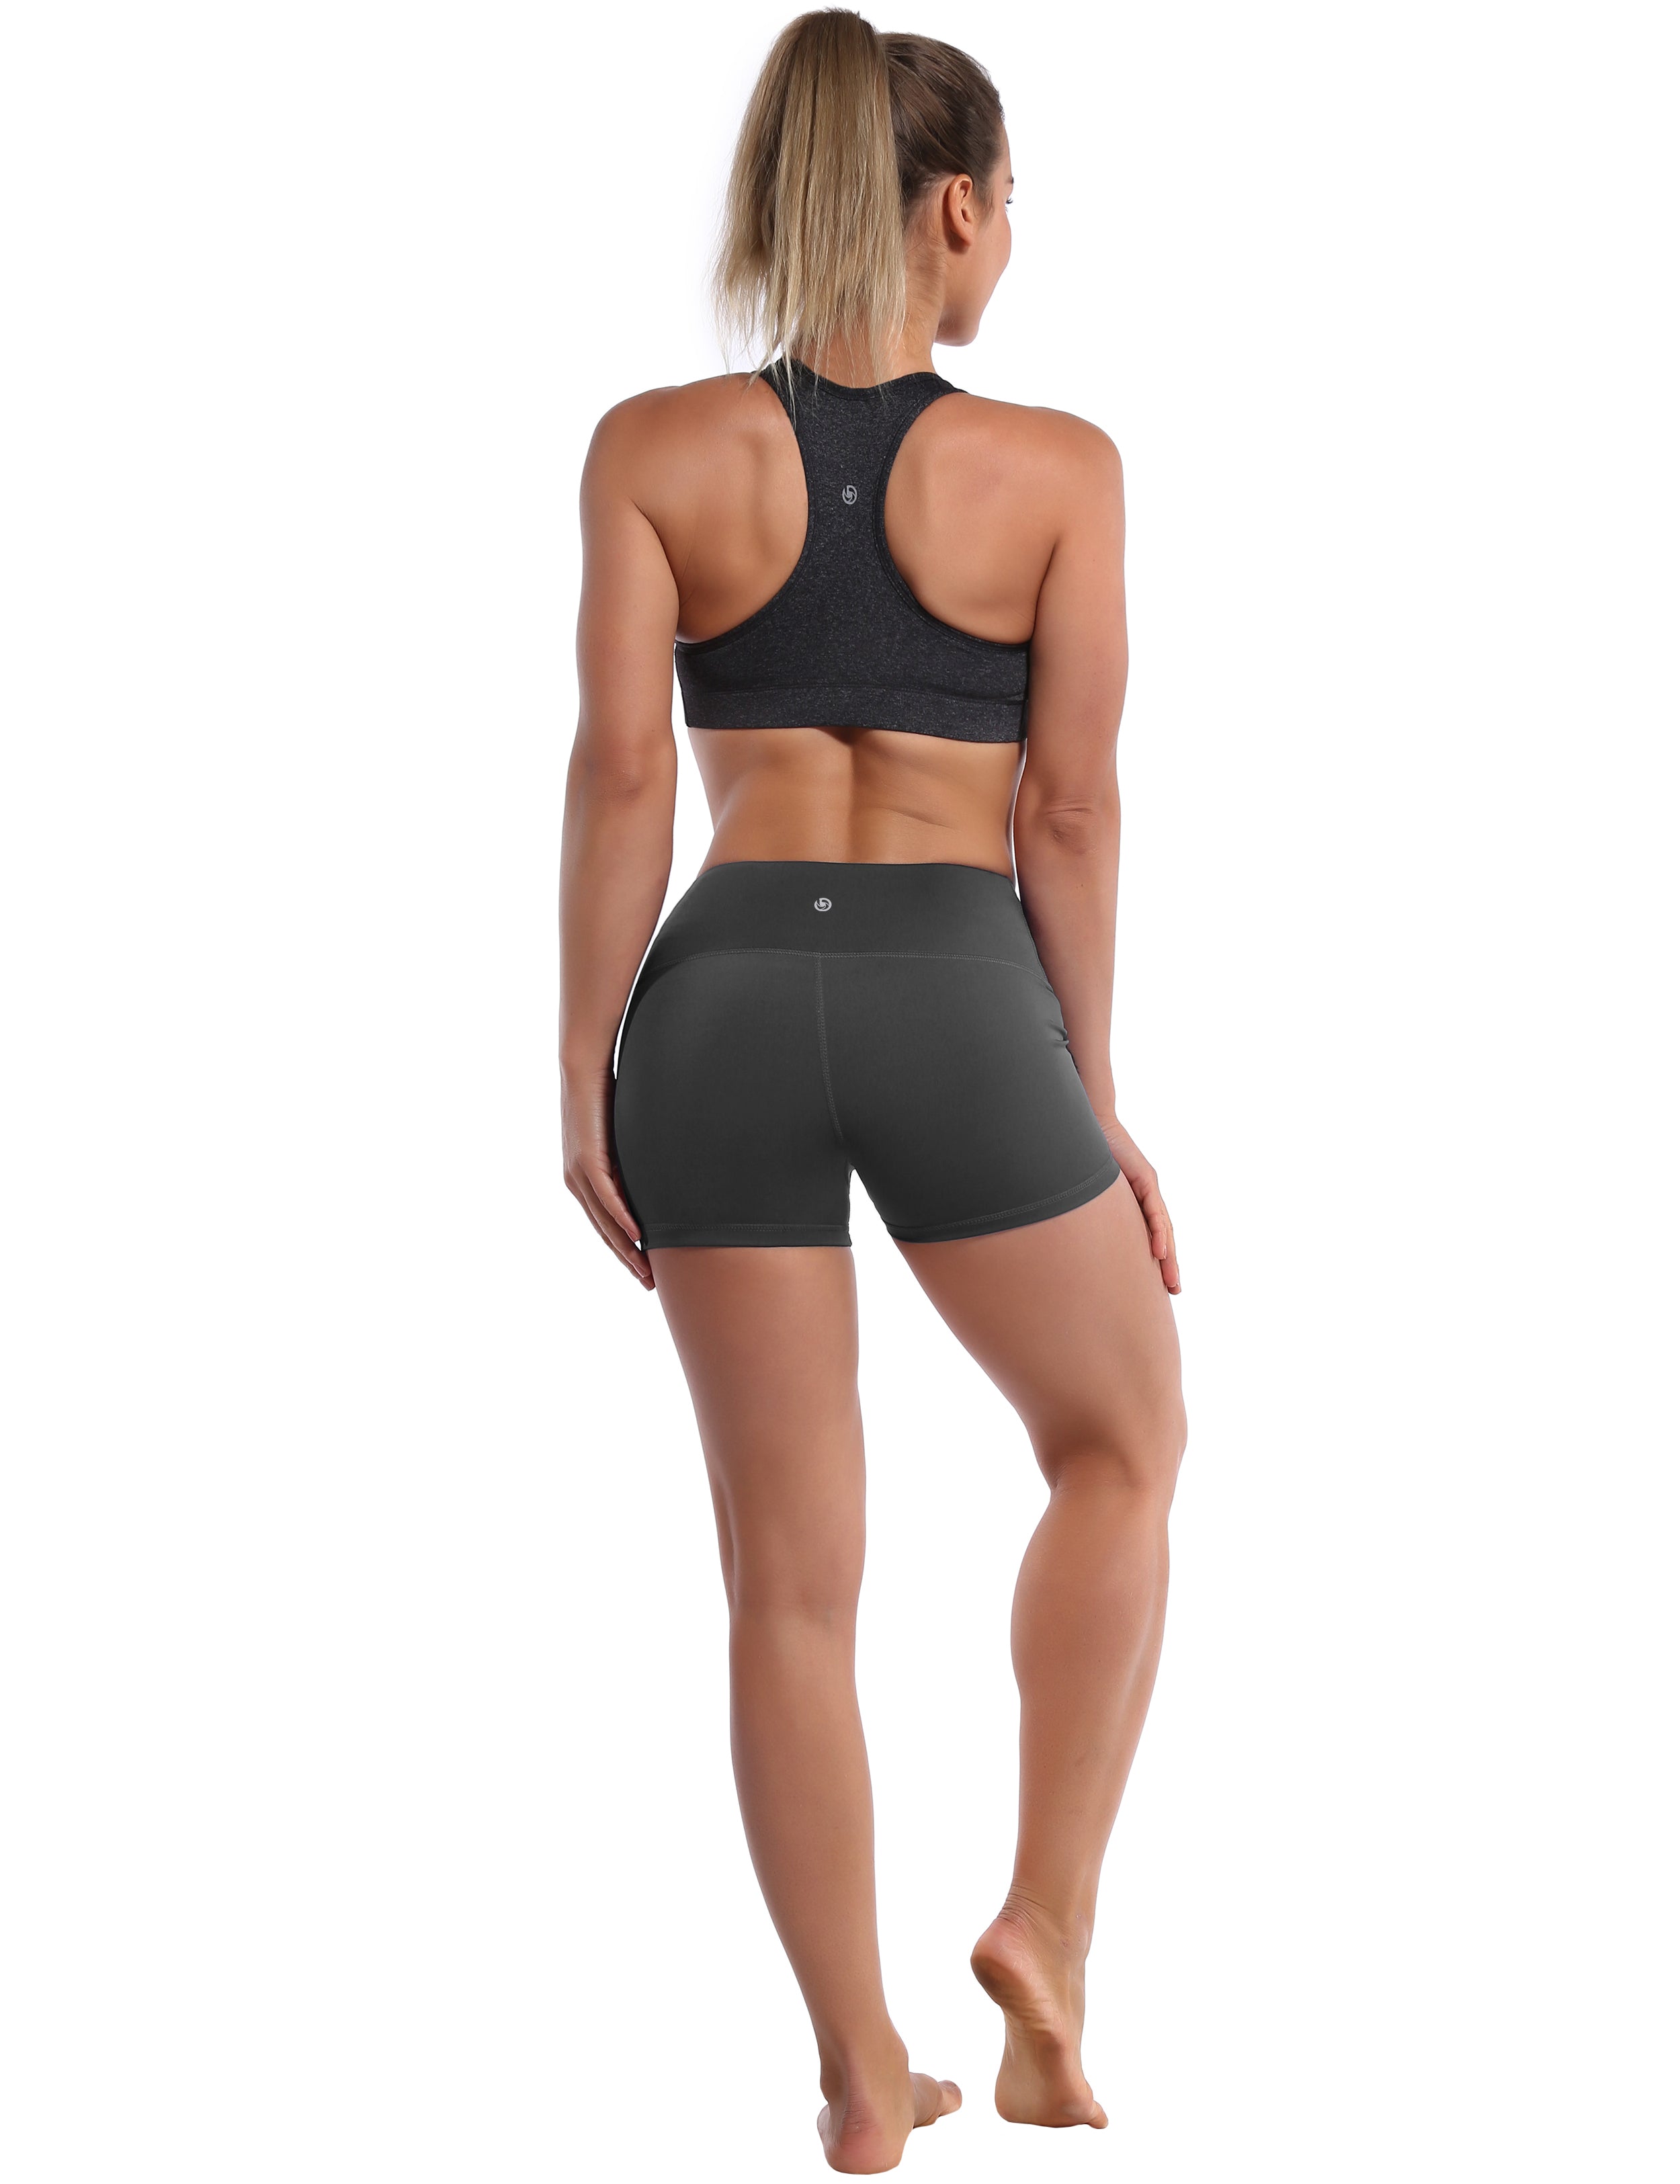 2.5" Running Shorts shadowcharcoal Softest-ever fabric High elasticity High density 4-way stretch Fabric doesn't attract lint easily No see-through Moisture-wicking Machine wash 75% Nylon, 25% Spandex